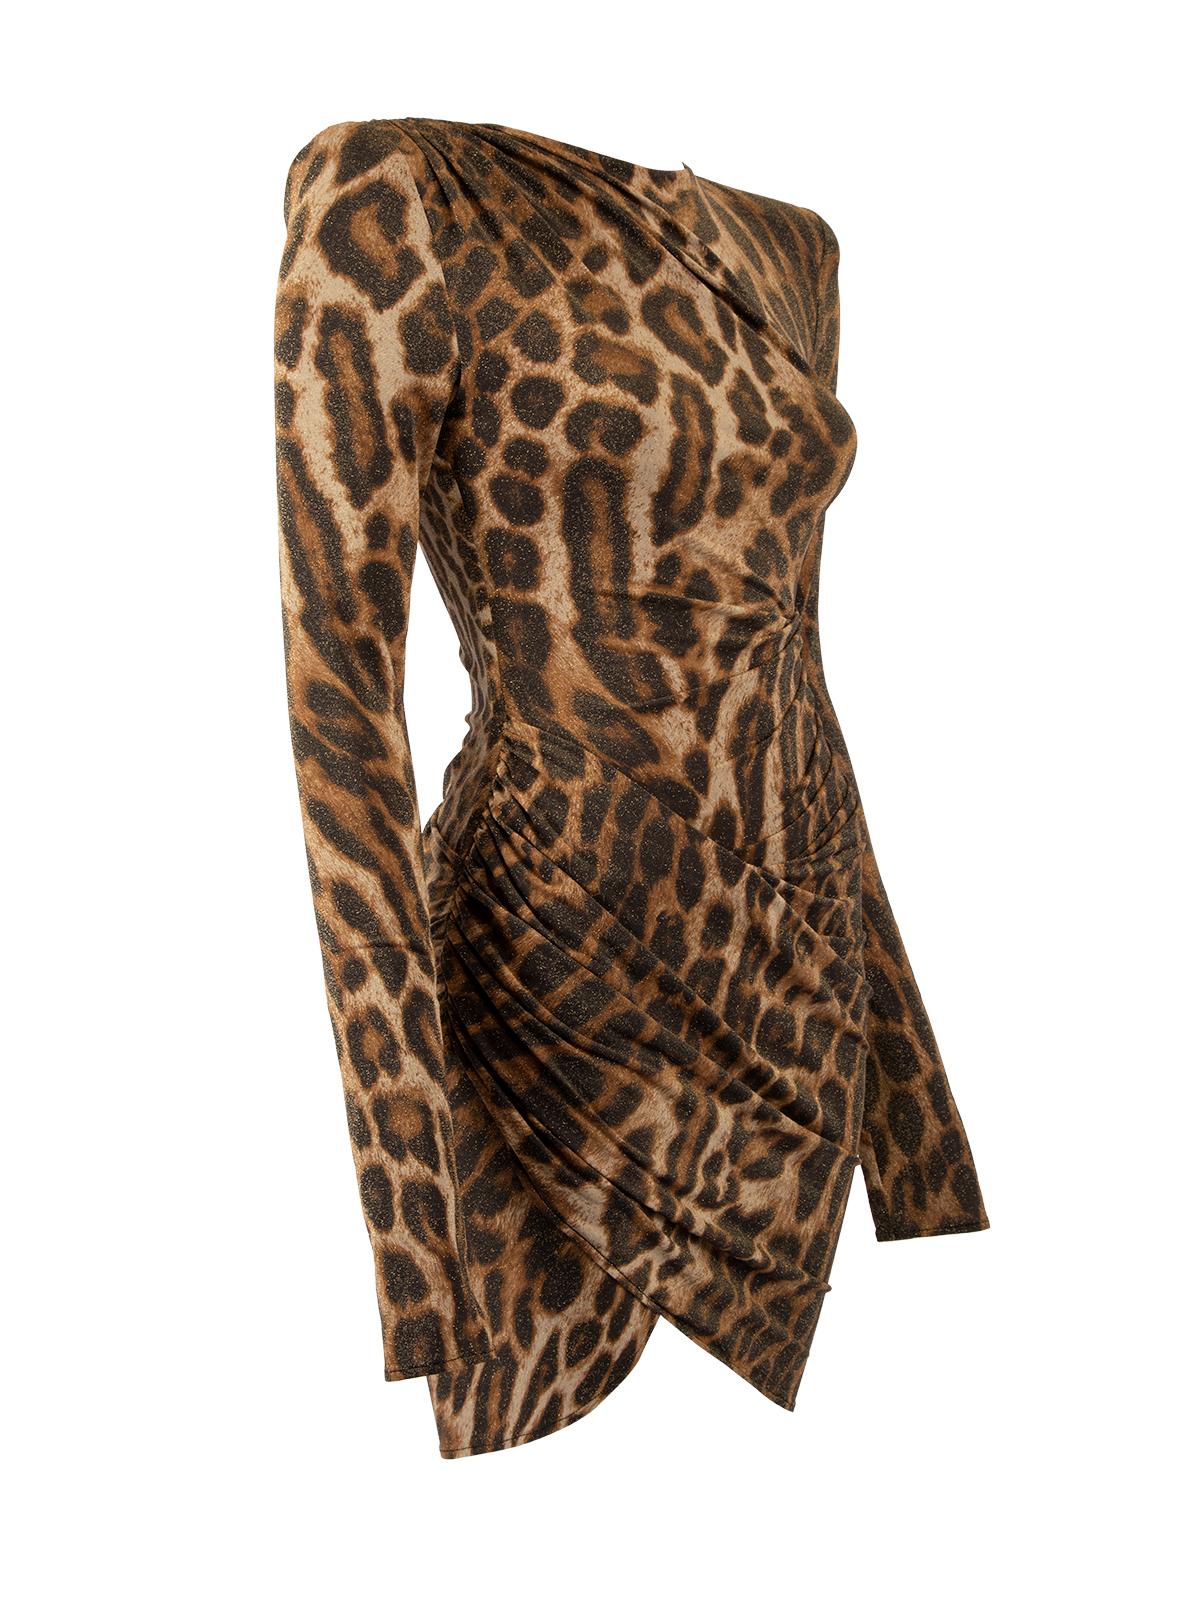 CONDITION is Never worn, with tags. No visible wear and pilling to the dress is evident on this new designer resale item.   Details  Leopard 66% Polyamide, 23% Polyester, 11% Elastane Evening dress Shoulder pads Tight fitting Long sleeves    Round